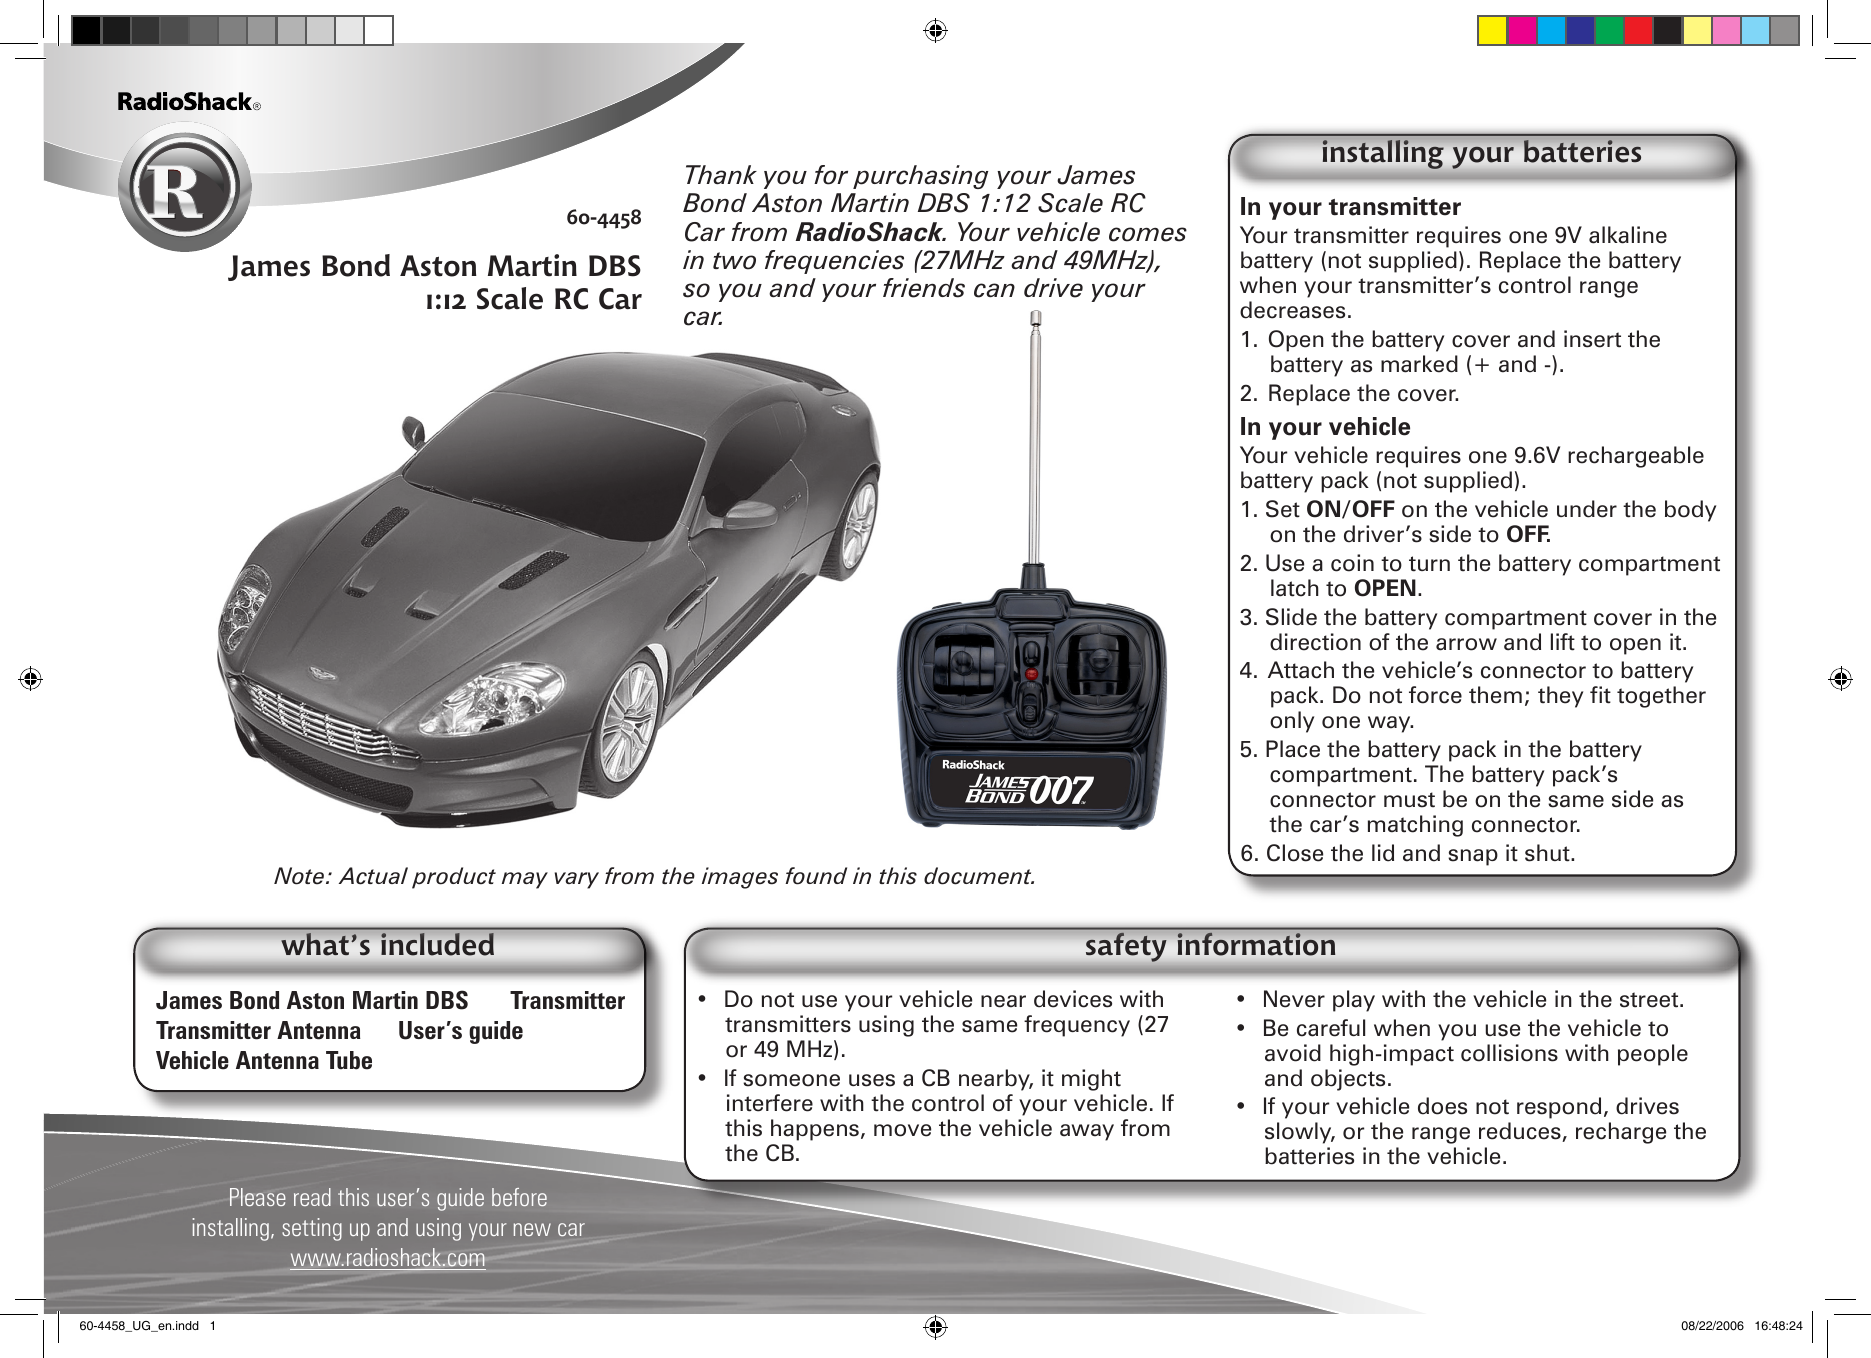 Please read this user’s guide before installing, setting up and using your new carwww.radioshack.com60-4458James Bond Aston Martin DBS 1:12 Scale RC CarJames Bond Aston Martin DBS  TransmitterTransmitter Antenna  User’s guideVehicle Antenna Tubewhat’s includedIn your transmitter Your transmitter requires one 9V alkaline battery (not supplied). Replace the battery when your transmitter’s control range decreases.1. Open the battery cover and insert the battery as marked (+ and -). 2. Replace the cover. In your vehicle Your vehicle requires one 9.6V rechargeable battery pack (not supplied).1. Set ON/OFF on the vehicle under the body on the driver’s side to OFF.2. Use a coin to turn the battery compartment latch to OPEN.3. Slide the battery compartment cover in the direction of the arrow and lift to open it.4. Attach the vehicle’s connector to battery pack. Do not force them; they t together only one way.5. Place the battery pack in the battery compartment. The battery pack’s connector must be on the same side as the car’s matching connector.6. Close the lid and snap it shut.installing your batteries•  Do not use your vehicle near devices with transmitters using the same frequency (27 or 49 MHz). •  If someone uses a CB nearby, it might interfere with the control of your vehicle. If this happens, move the vehicle away from the CB.•  Never play with the vehicle in the street.•  Be careful when you use the vehicle to avoid high-impact collisions with people and objects.•  If your vehicle does not respond, drives slowly, or the range reduces, recharge the batteries in the vehicle.safety informationNote: Actual product may vary from the images found in this document.Thank you for purchasing your James Bond Aston Martin DBS 1:12 Scale RC Car from RadioShack. Your vehicle comes in two frequencies (27MHz and 49MHz), so you and your friends can drive your car.60-4458_UG_en.indd   1 08/22/2006   16:48:24